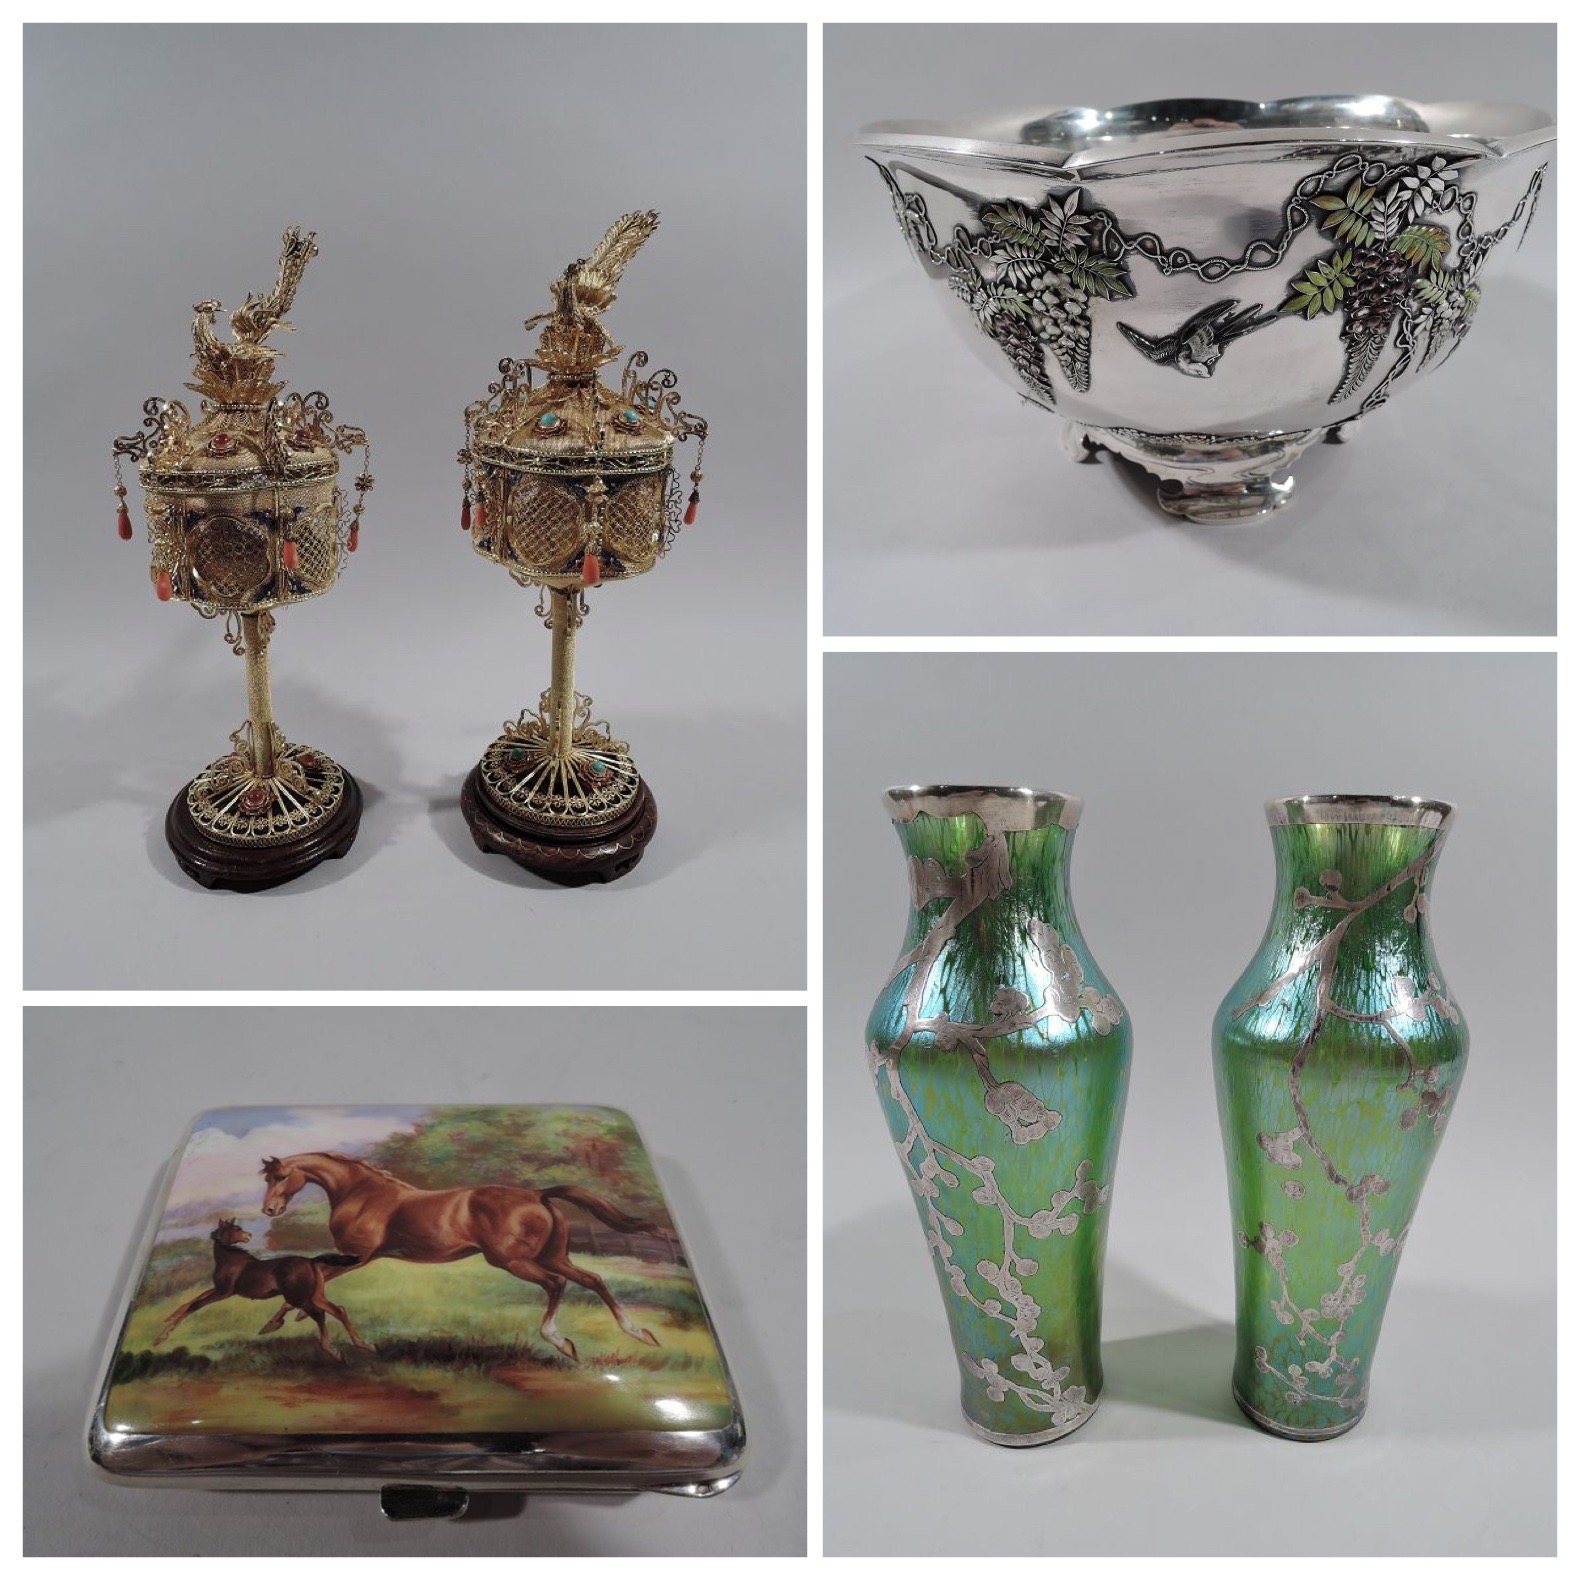 Pair of Antique Chinese Silver Gilt, Hardstone & Enamel Lanterns, Meiji-Era Japanese Silver & Enamel Wisteria & Prunus Branch Bowl, Pair of Loetz Green Art Glass Vases with Japonesque Silver Overlay, Antique Silver & Enamel Frolicking Foal and Mare Cigarette Case